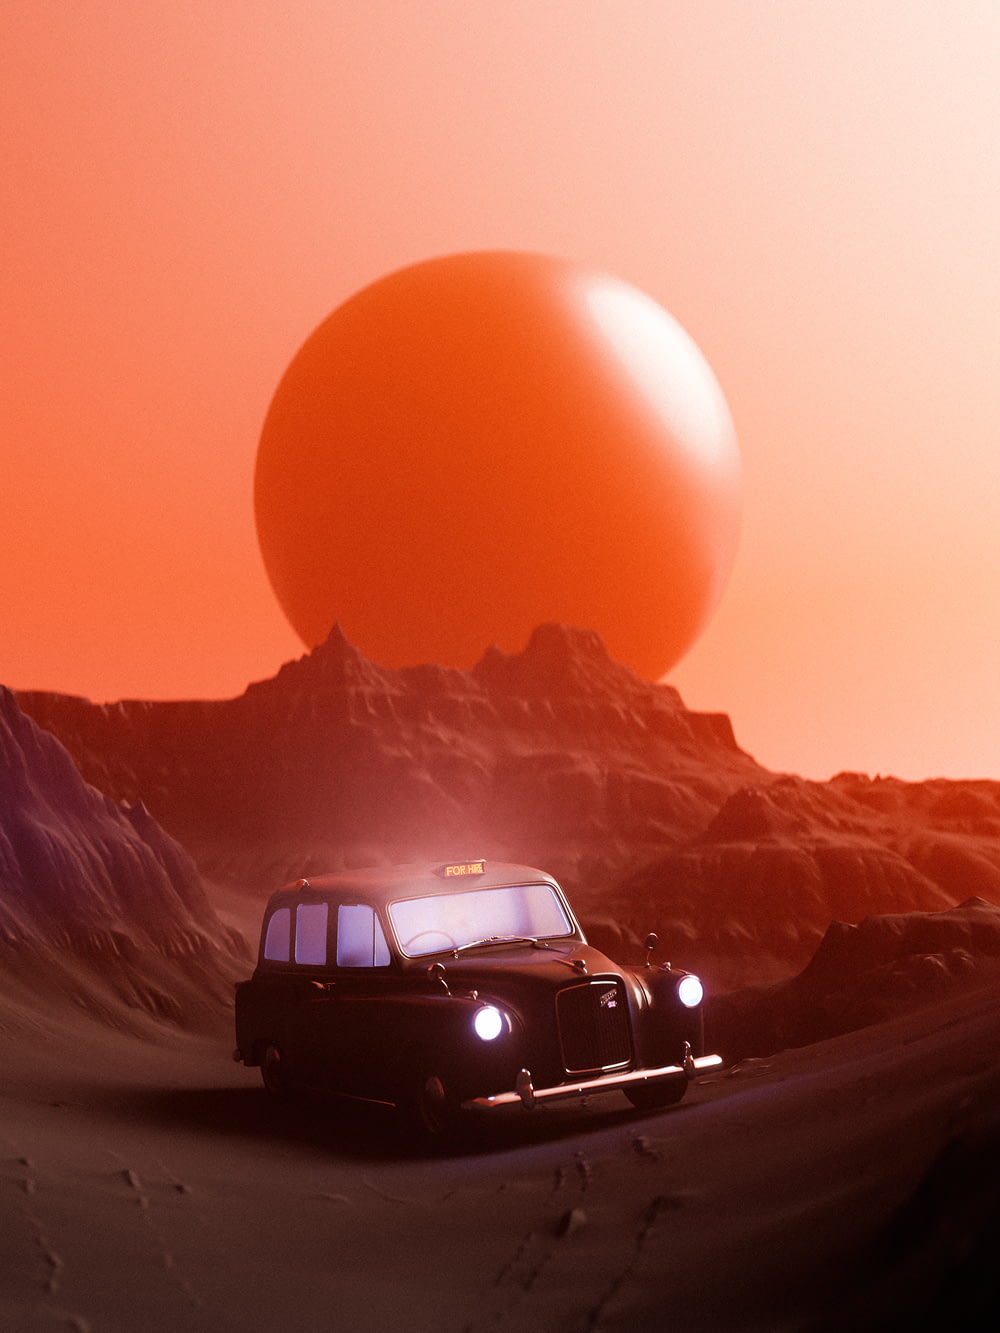 a car parked in front of a large orange moon